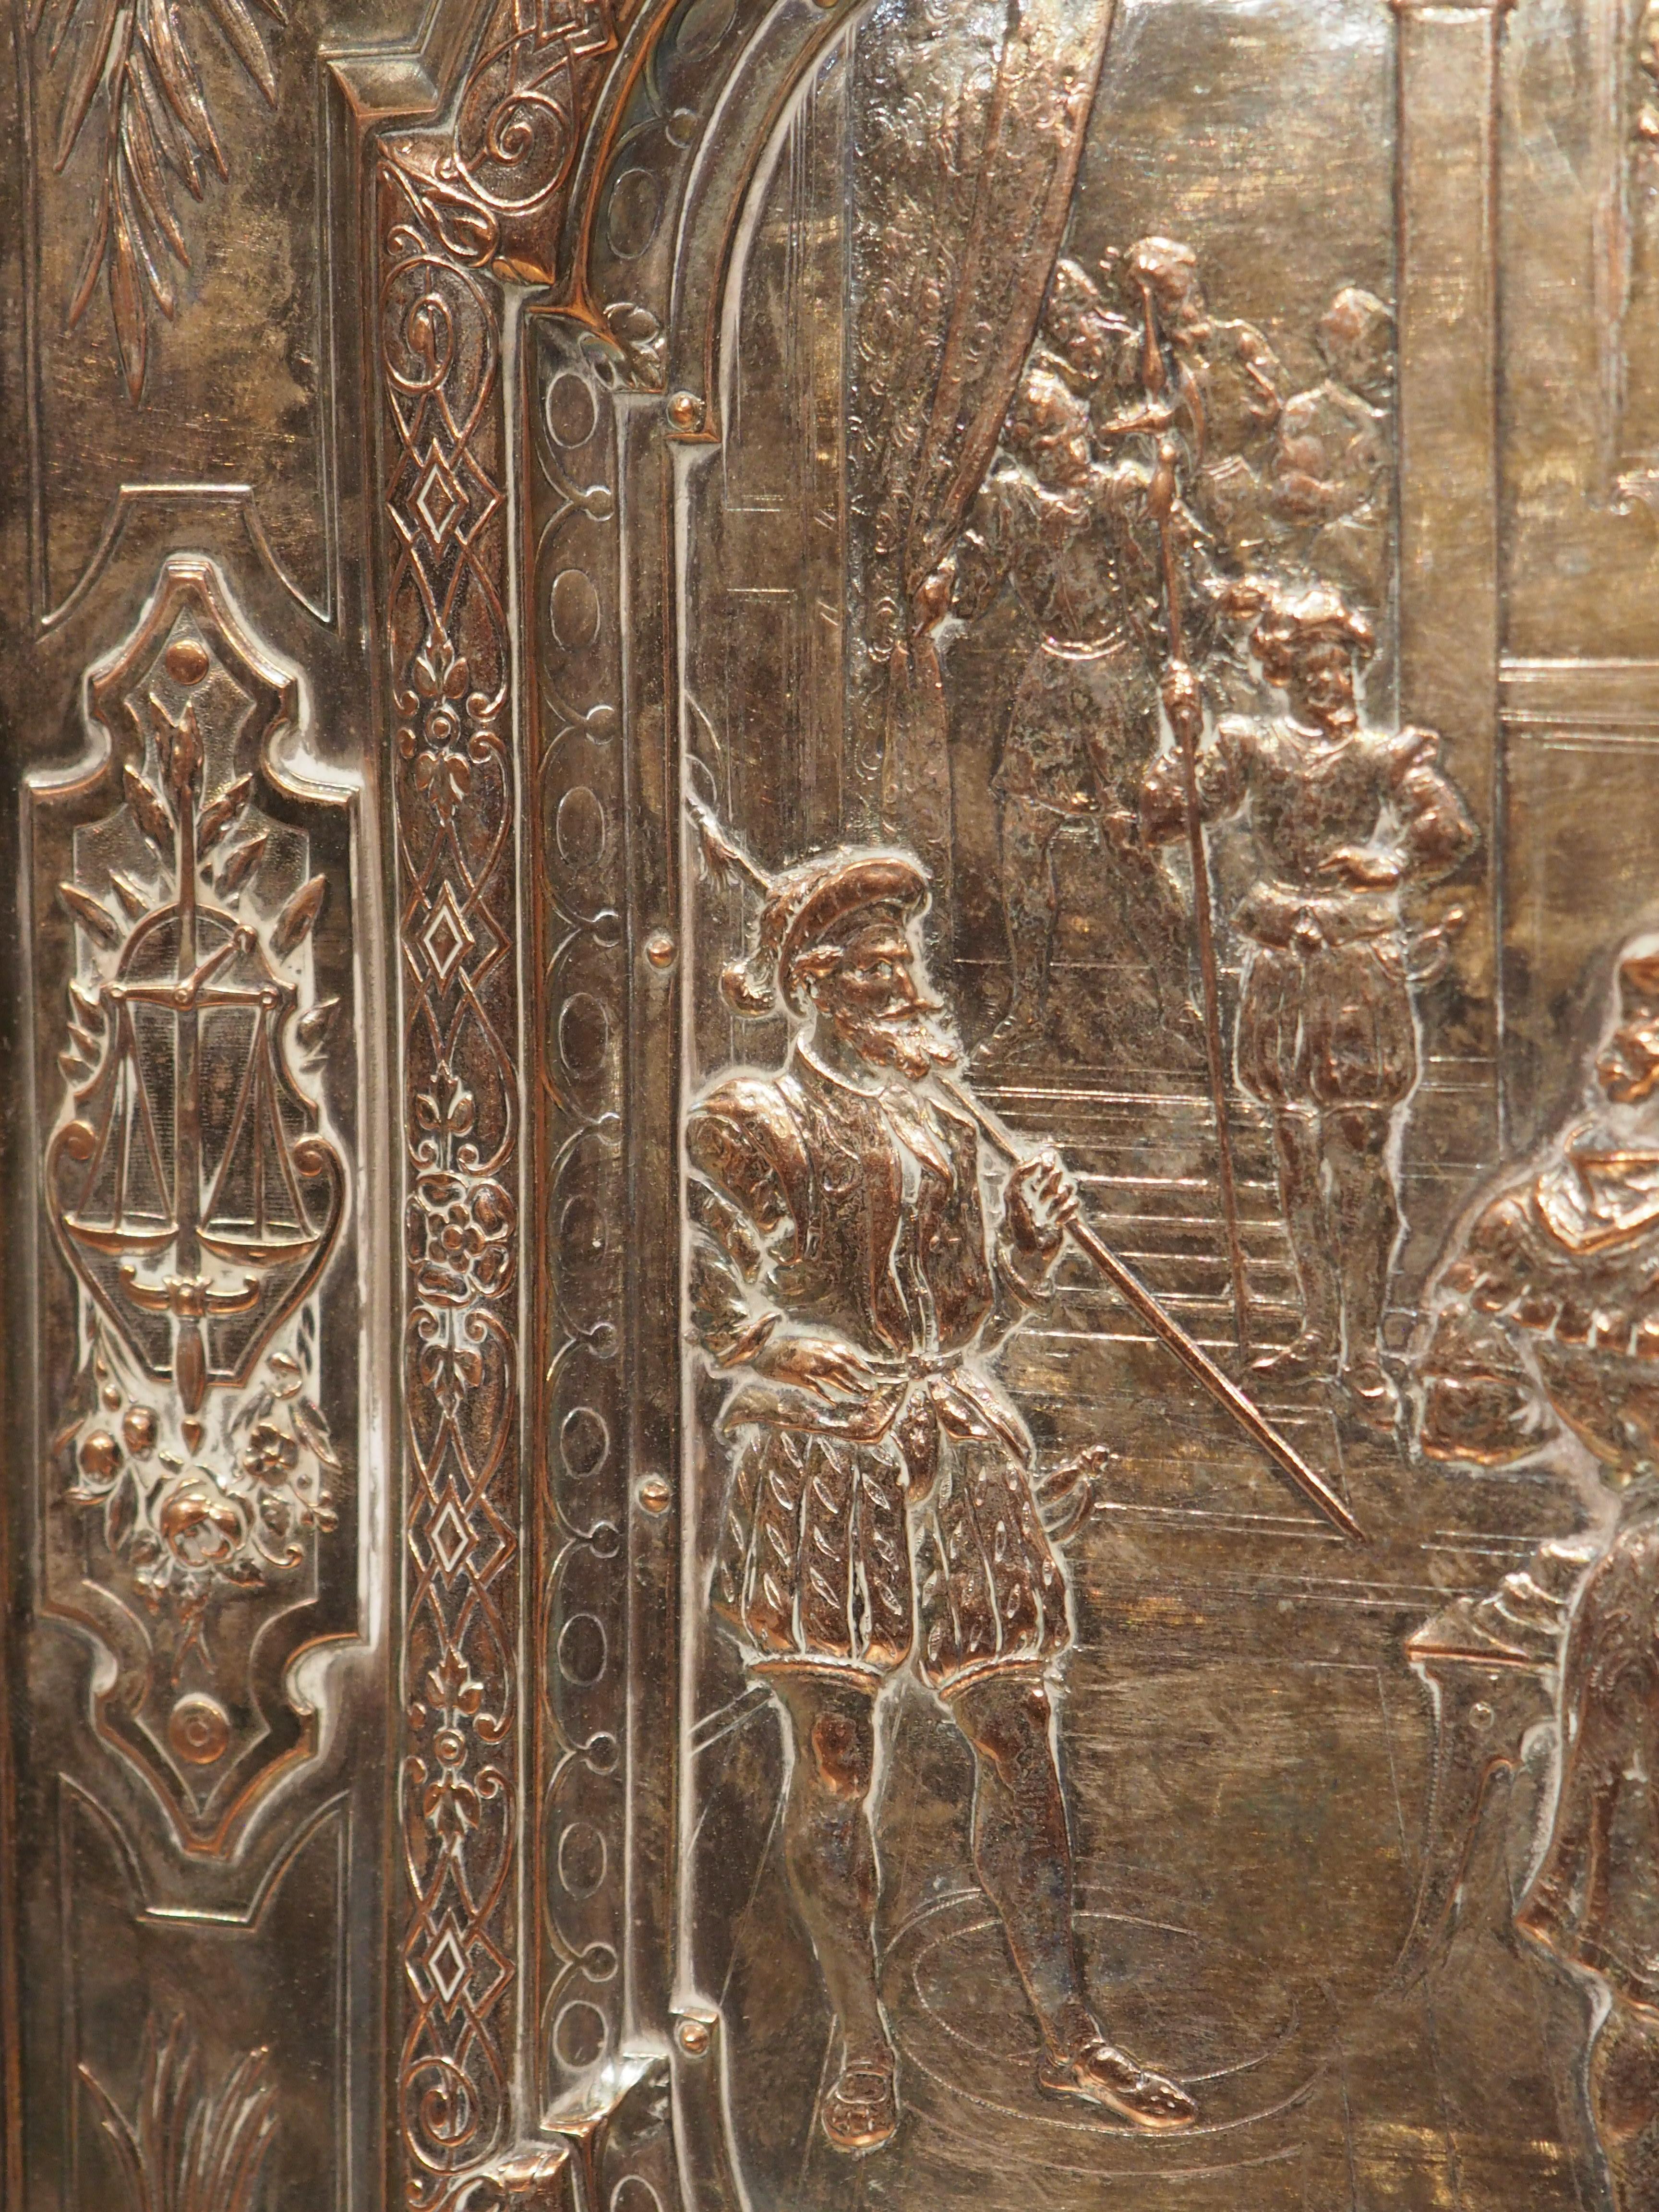 Utilizing the metalworking technique known as repousse, where images are hammered from the verso side, this pair of copper reliefs depict two scenes from Shakespearean plays. After the original 1812 panels by Elkington & Co, the famous silver